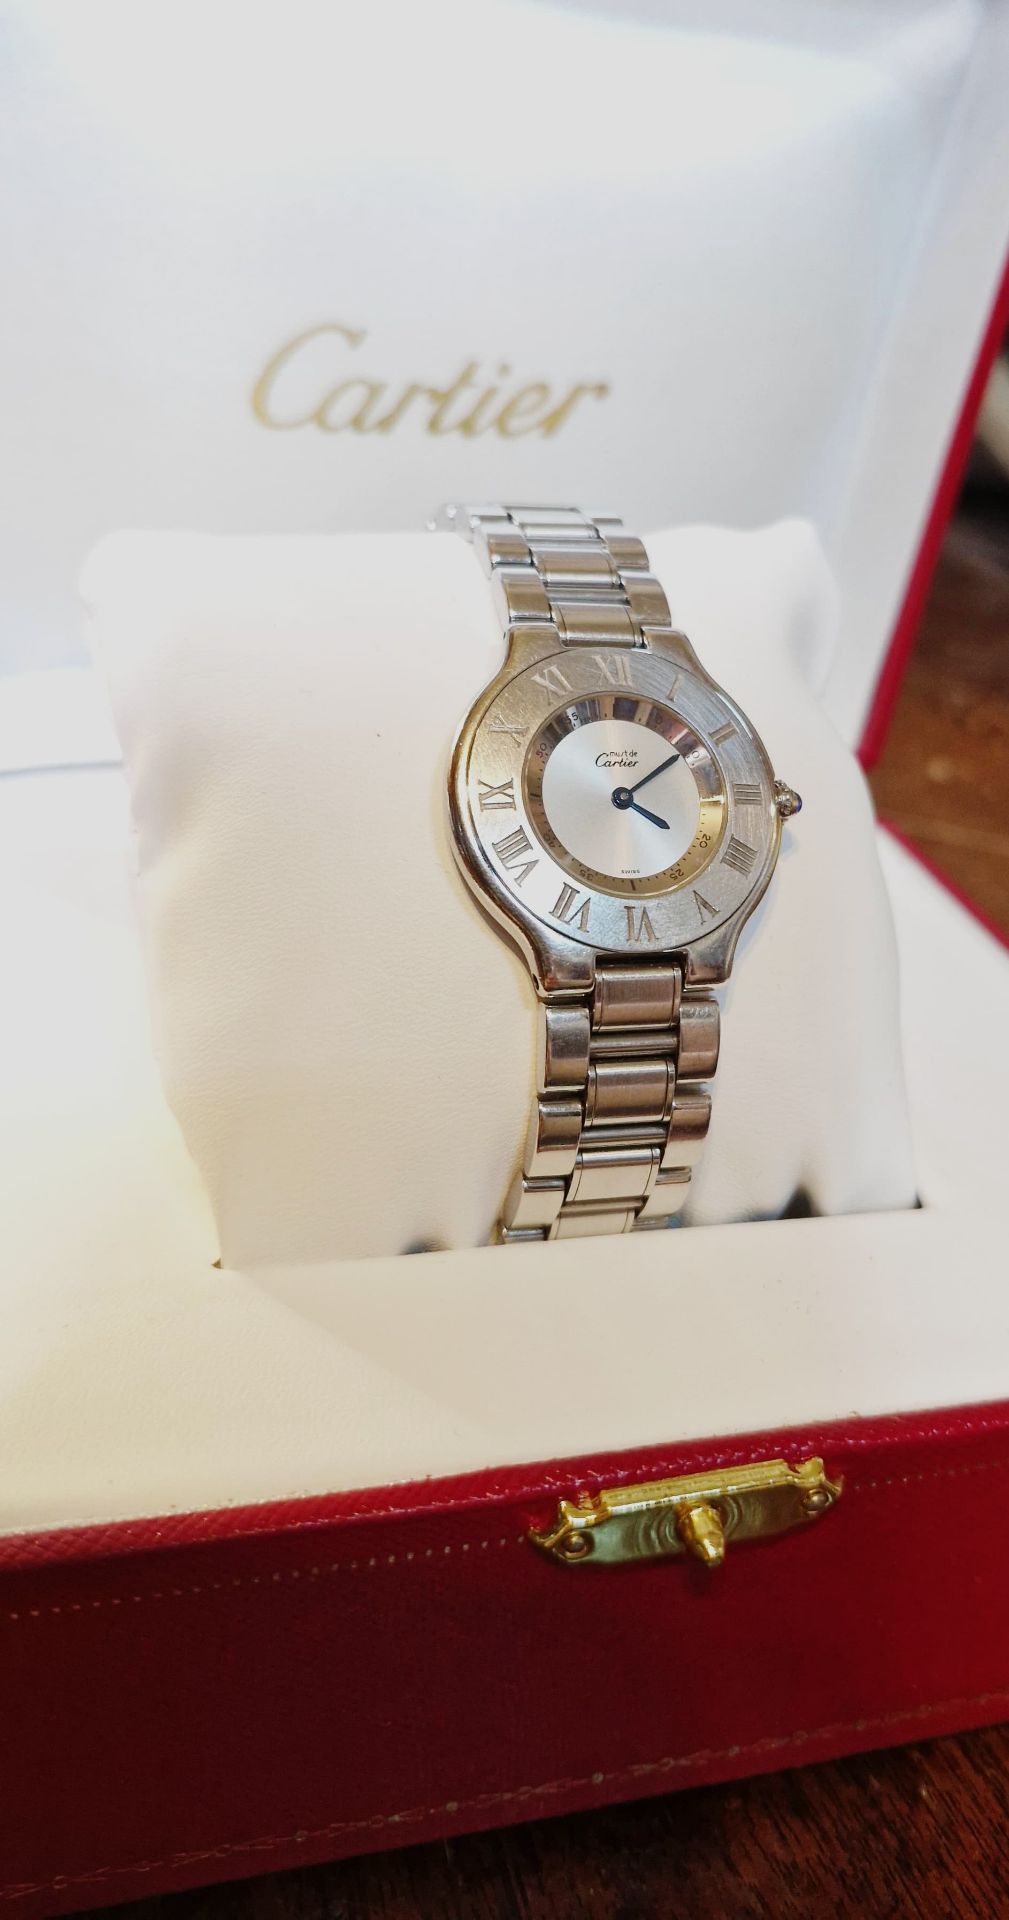 Cartier Ladies Watch Stainless Steel, Box & Papers, NO VAT - Image 7 of 9